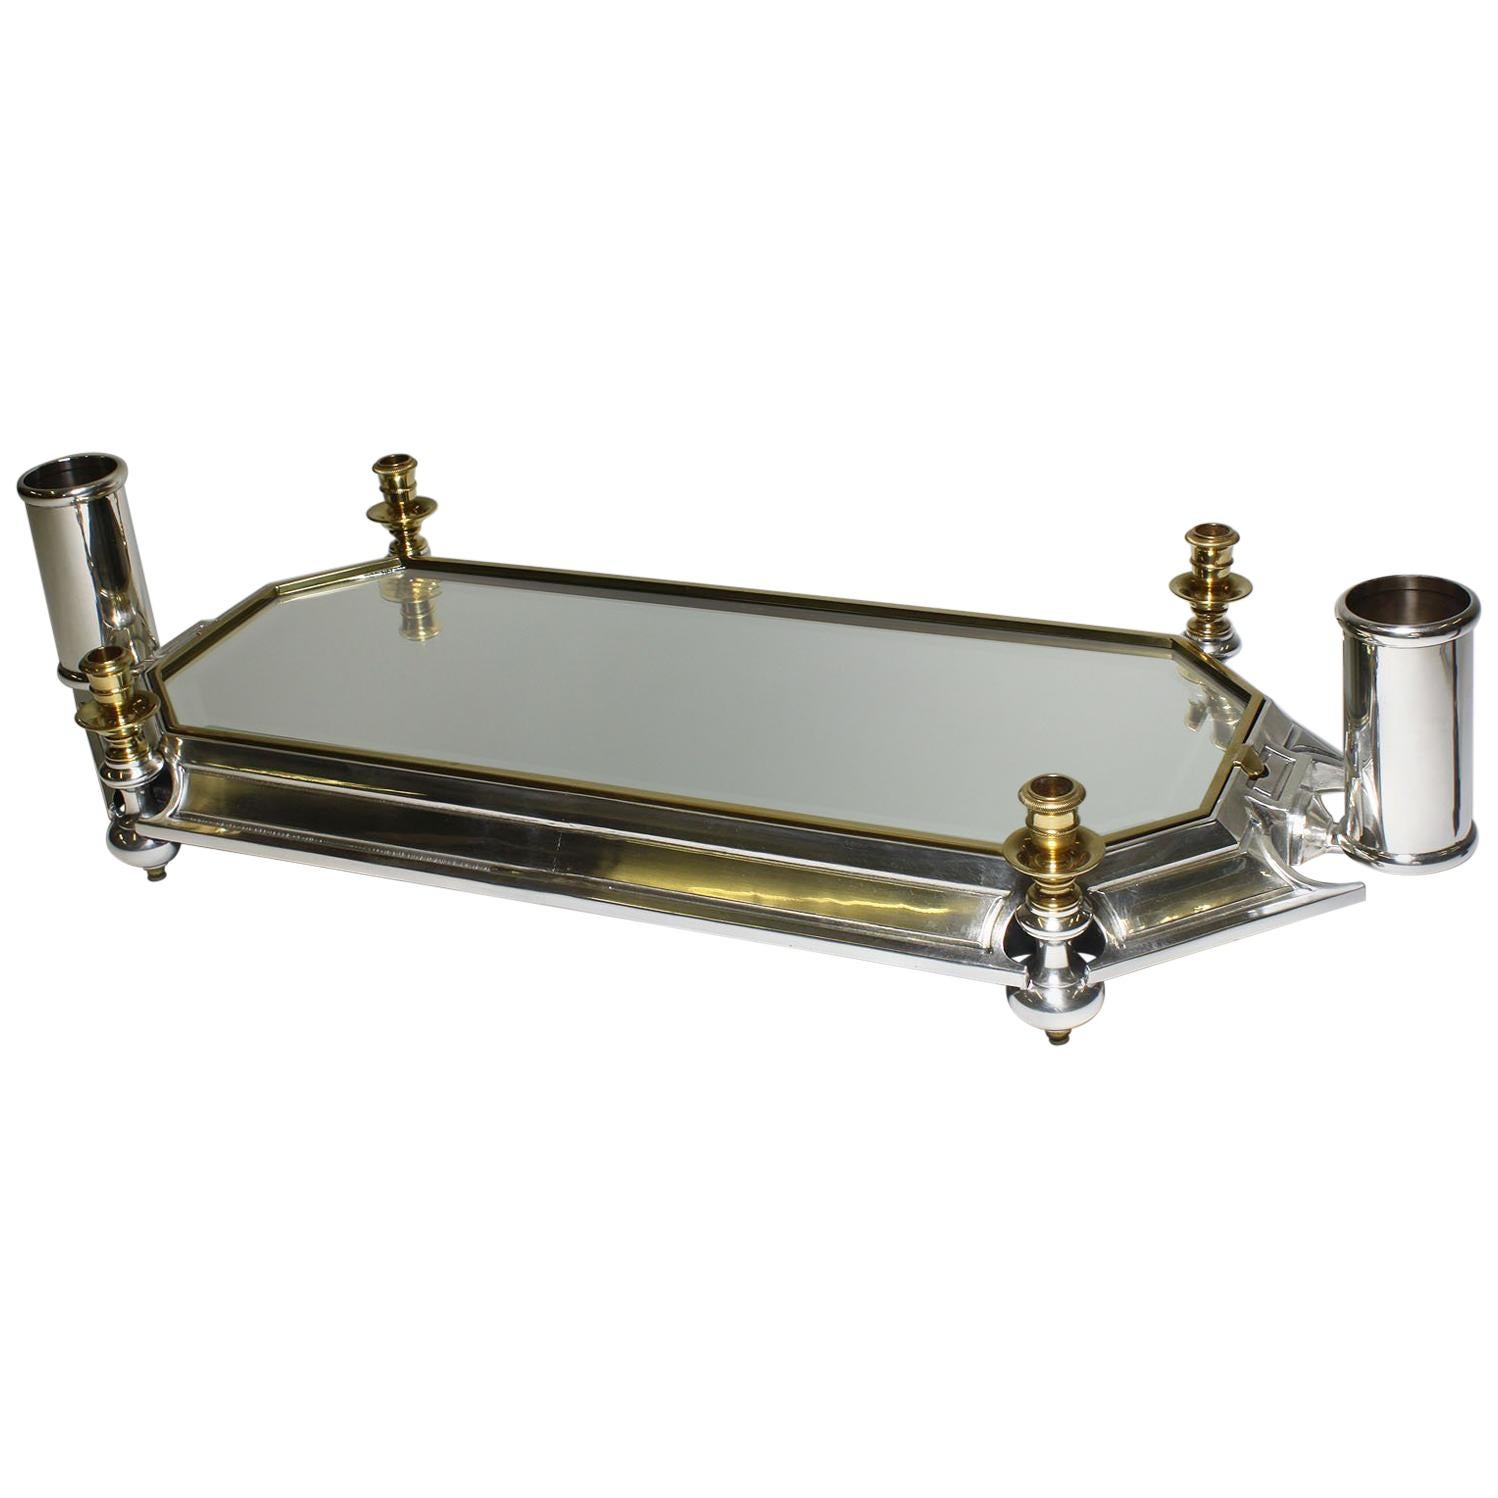 19th-20th Century Plated Surtout de Table Centerpice, Attributed to Christofle